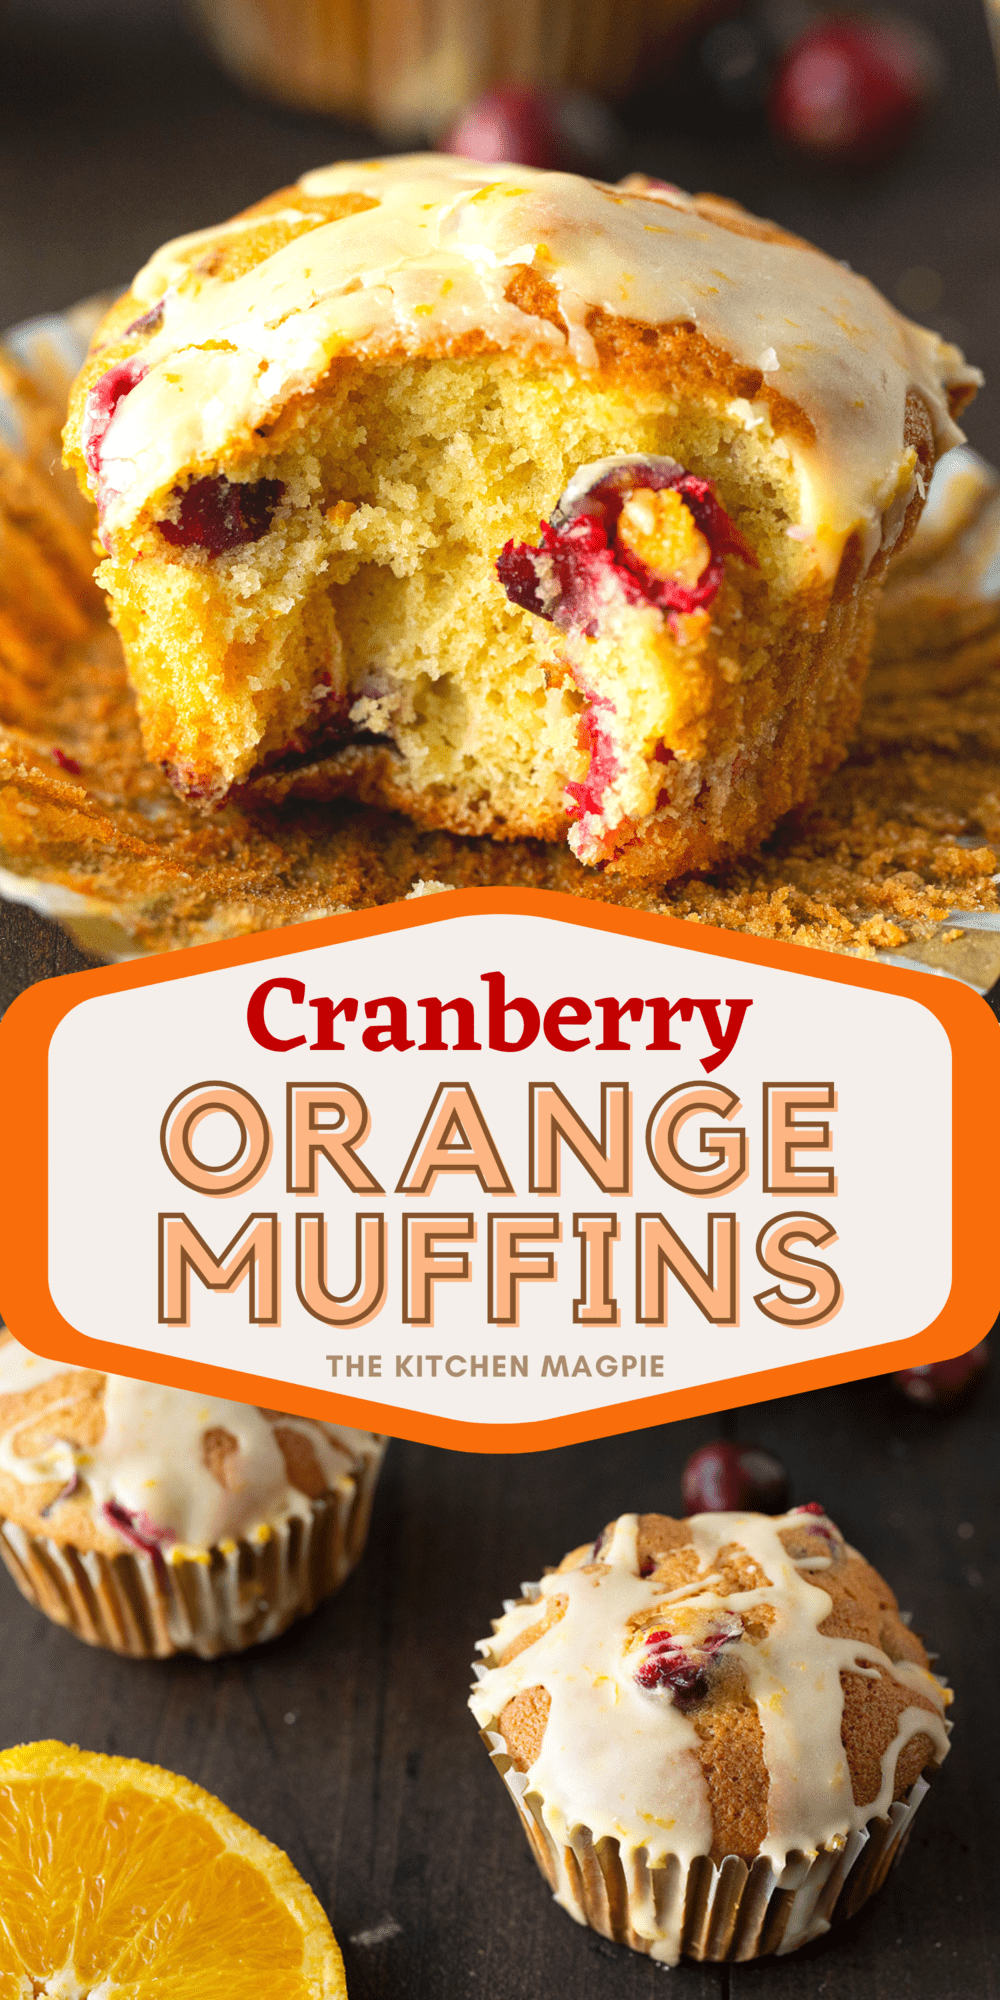 These cranberry orange muffins are loaded with fresh cranberries, fresh oranges and are the perfect taste of the season!